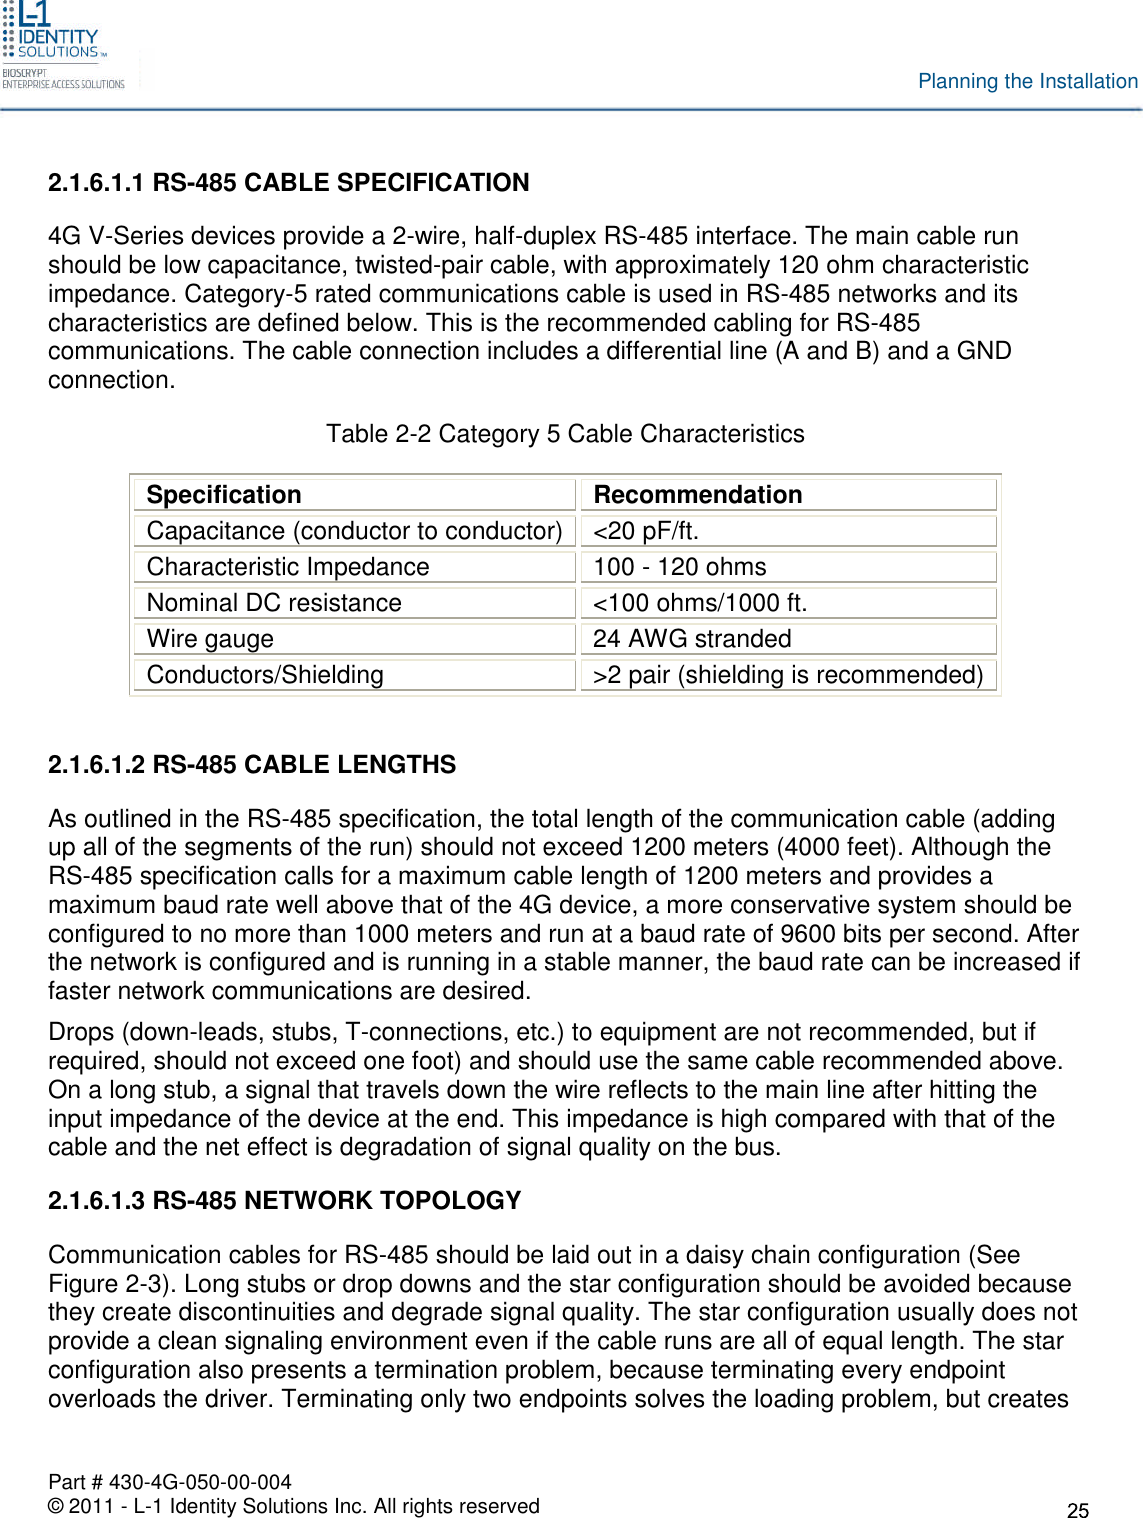 Part # 430-4G-050-00-004© 2011 - L-1 Identity Solutions Inc. All rights reservedPlanning the Installation2.1.6.1.1 RS-485 CABLE SPECIFICATION4G V-Series devices provide a 2-wire, half-duplex RS-485 interface. The main cable runshould be low capacitance, twisted-pair cable, with approximately 120 ohm characteristicimpedance. Category-5 rated communications cable is used in RS-485 networks and itscharacteristics are defined below. This is the recommended cabling for RS-485communications. The cable connection includes a differential line (A and B) and a GNDconnection.Table 2-2 Category 5 Cable CharacteristicsSpecificationRecommendationCapacitance (conductor to conductor) &lt;20 pF/ft.Characteristic Impedance 100 - 120 ohmsNominal DC resistance &lt;100 ohms/1000 ft.Wire gauge 24 AWG strandedConductors/Shielding &gt;2 pair (shielding is recommended)2.1.6.1.2 RS-485 CABLE LENGTHSAs outlined in the RS-485 specification, the total length of the communication cable (addingup all of the segments of the run) should not exceed 1200 meters (4000 feet). Although theRS-485 specification calls for a maximum cable length of 1200 meters and provides amaximum baud rate well above that of the 4G device, a more conservative system should beconfigured to no more than 1000 meters and run at a baud rate of 9600 bits per second. Afterthe network is configured and is running in a stable manner, the baud rate can be increased iffaster network communications are desired.Drops (down-leads, stubs, T-connections, etc.) to equipment are not recommended, but ifrequired, should not exceed one foot) and should use the same cable recommended above.On a long stub, a signal that travels down the wire reflects to the main line after hitting theinput impedance of the device at the end. This impedance is high compared with that of thecable and the net effect is degradation of signal quality on the bus.2.1.6.1.3 RS-485 NETWORK TOPOLOGYCommunication cables for RS-485 should be laid out in a daisy chain configuration (SeeFigure 2-3). Long stubs or drop downs and the star configuration should be avoided becausethey create discontinuities and degrade signal quality. The star configuration usually does notprovide a clean signaling environment even if the cable runs are all of equal length. The starconfiguration also presents a termination problem, because terminating every endpointoverloads the driver. Terminating only two endpoints solves the loading problem, but creates